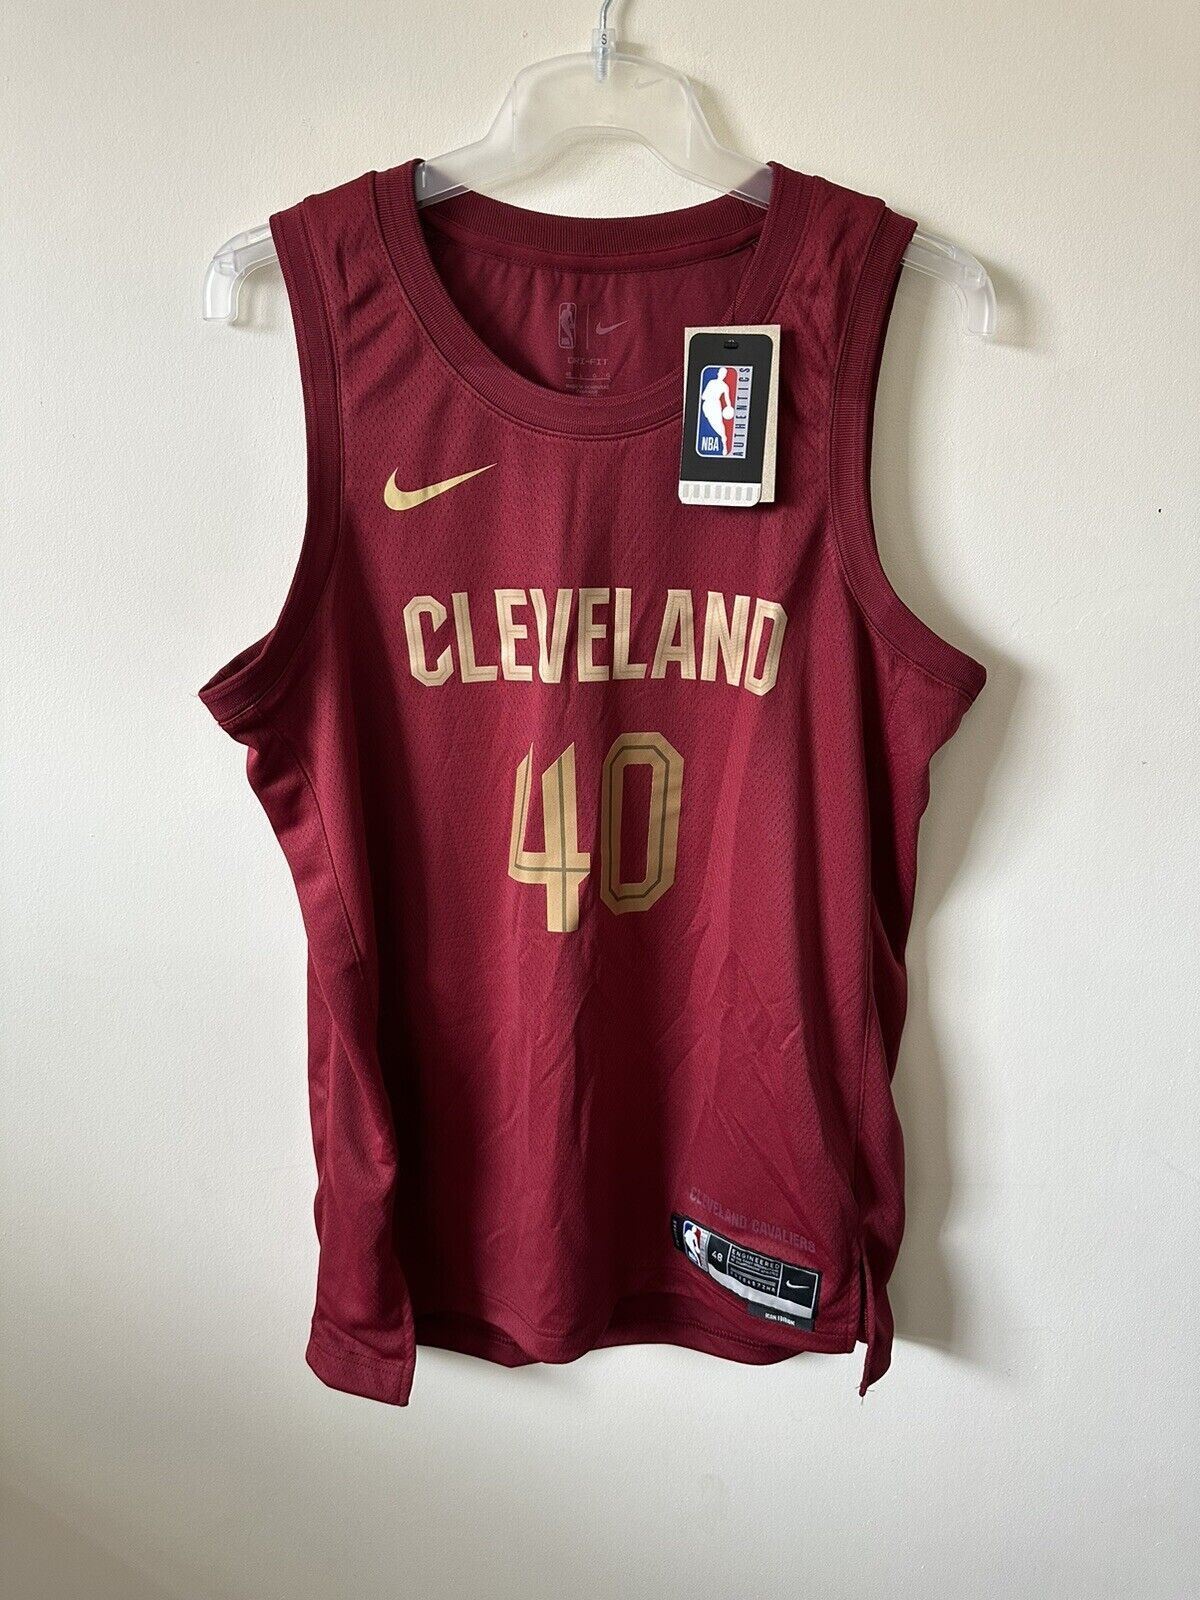 Nike NBA Cleveland Cavaliers Icon Edition Jersey ALBERT 40 Mens Large *DF*